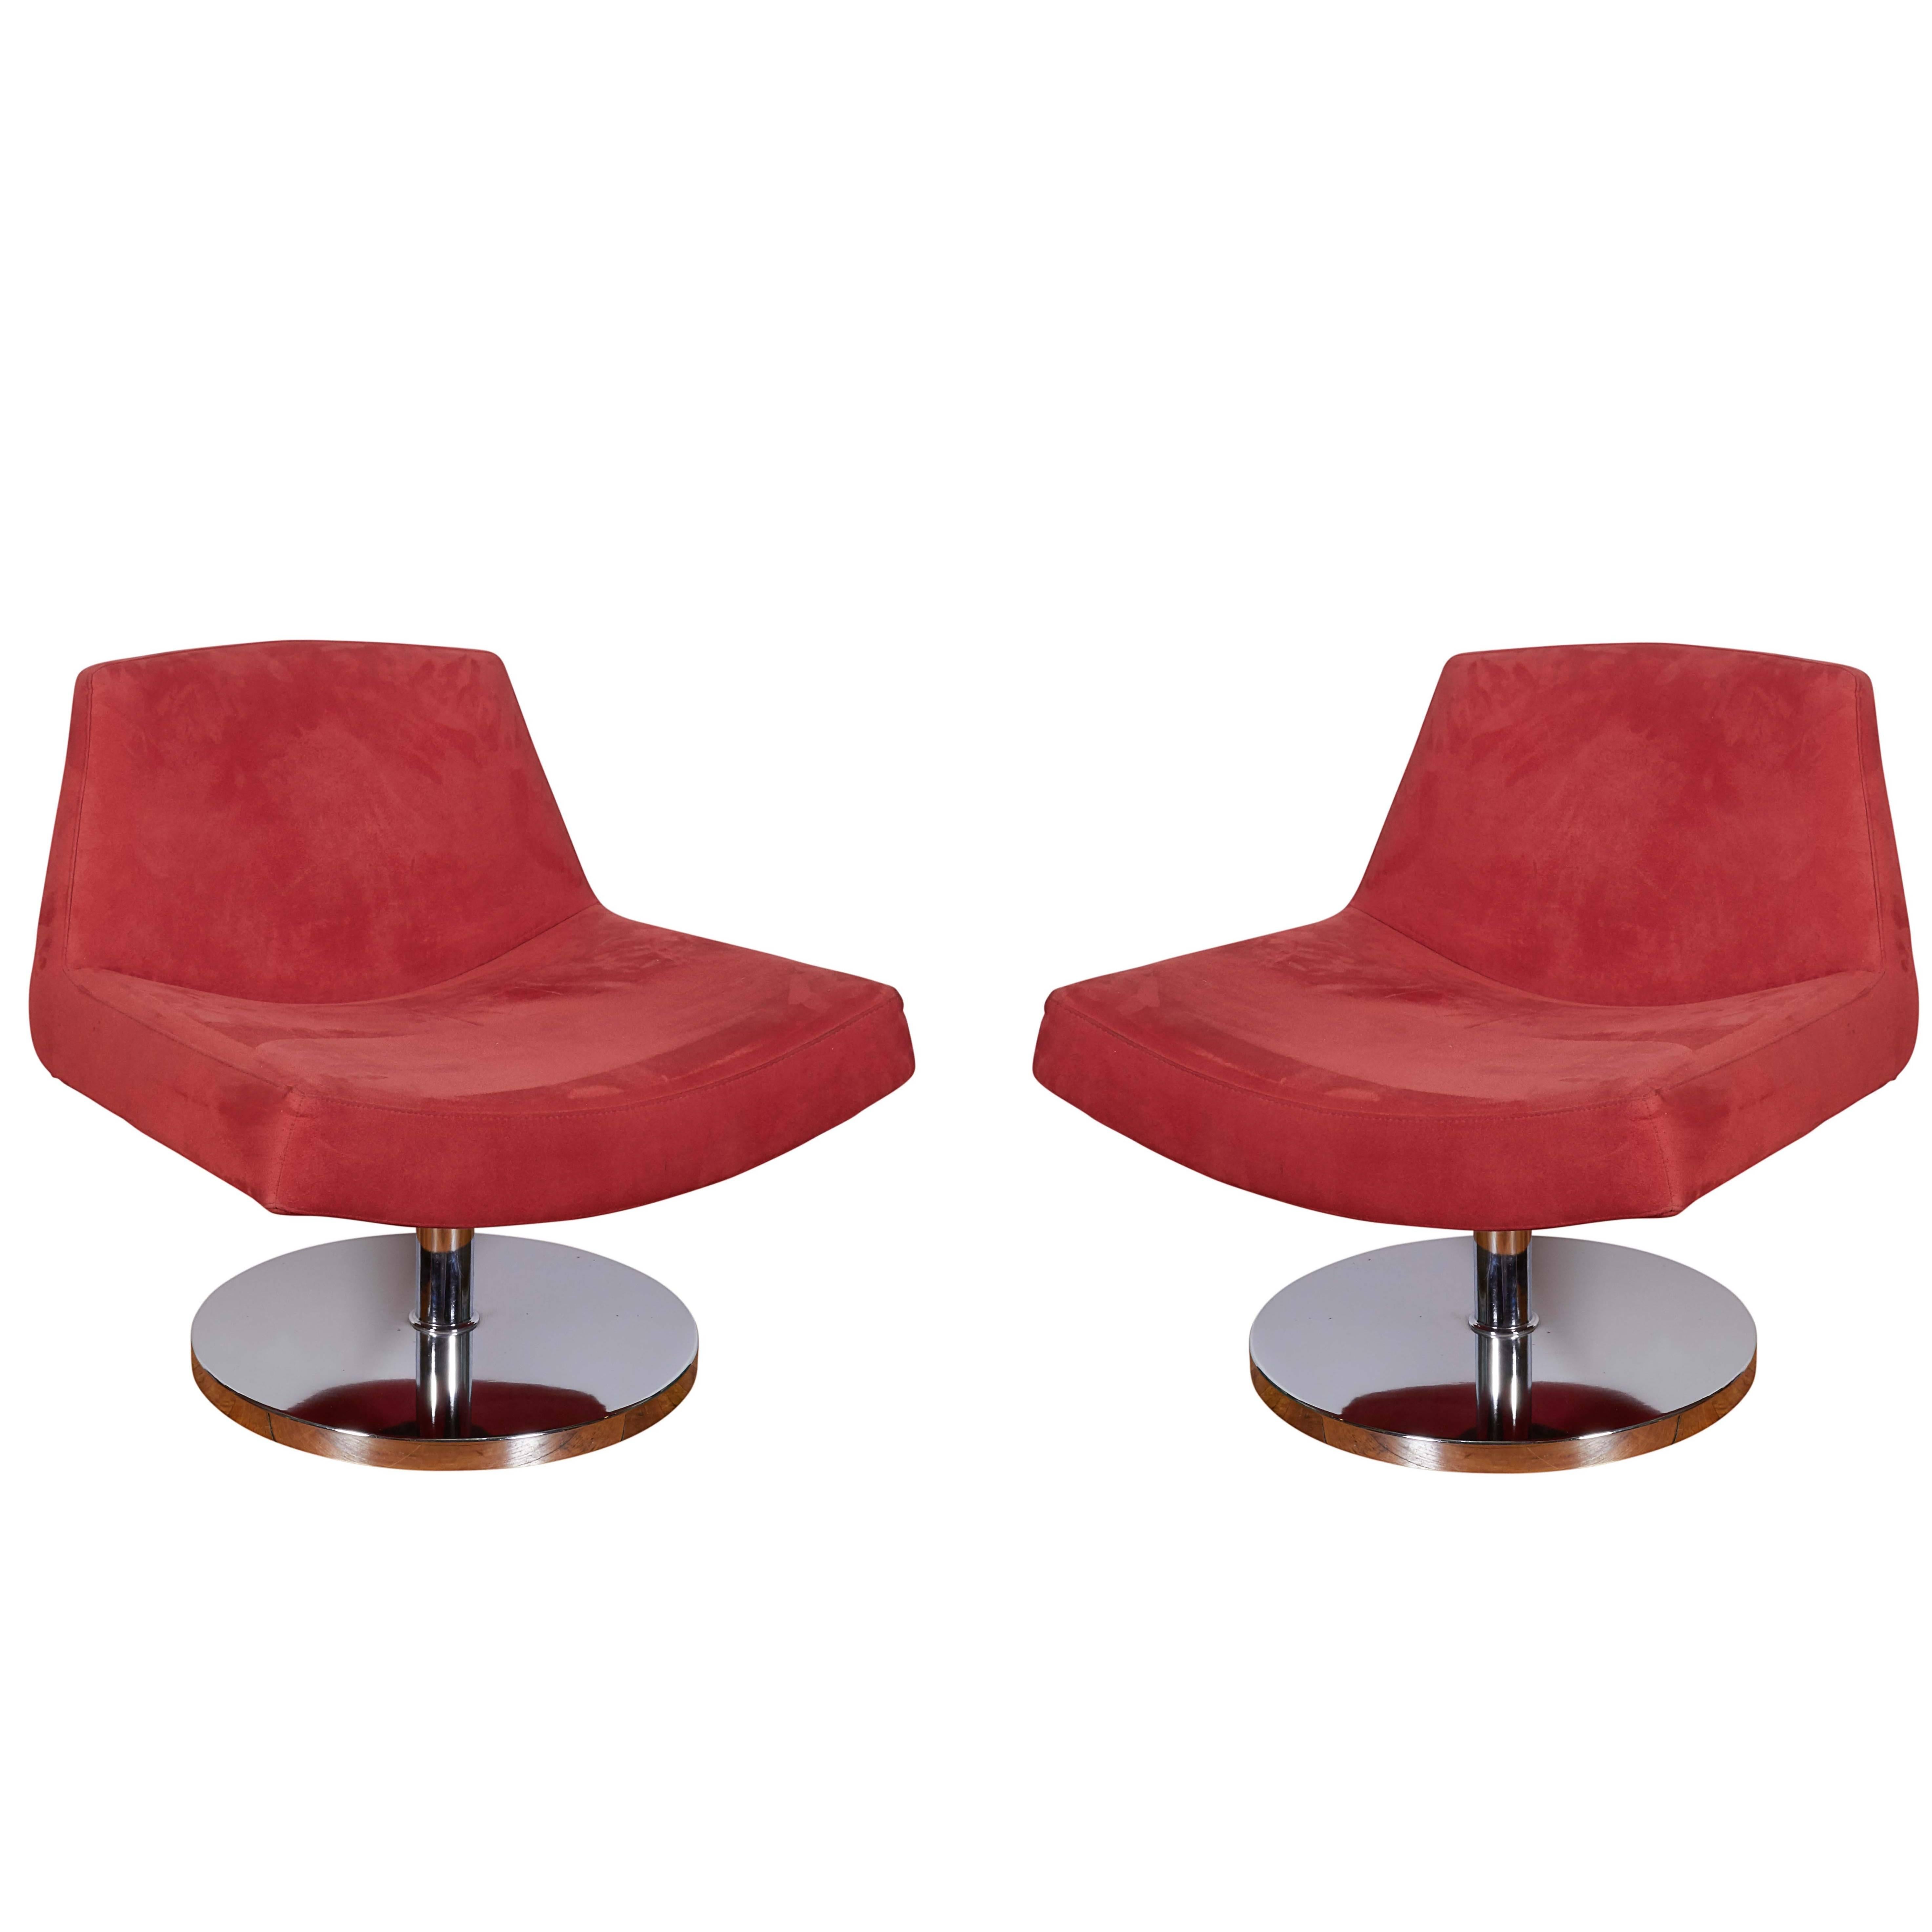 Pair of Modern Swivel Slipper Chairs in Red Suede